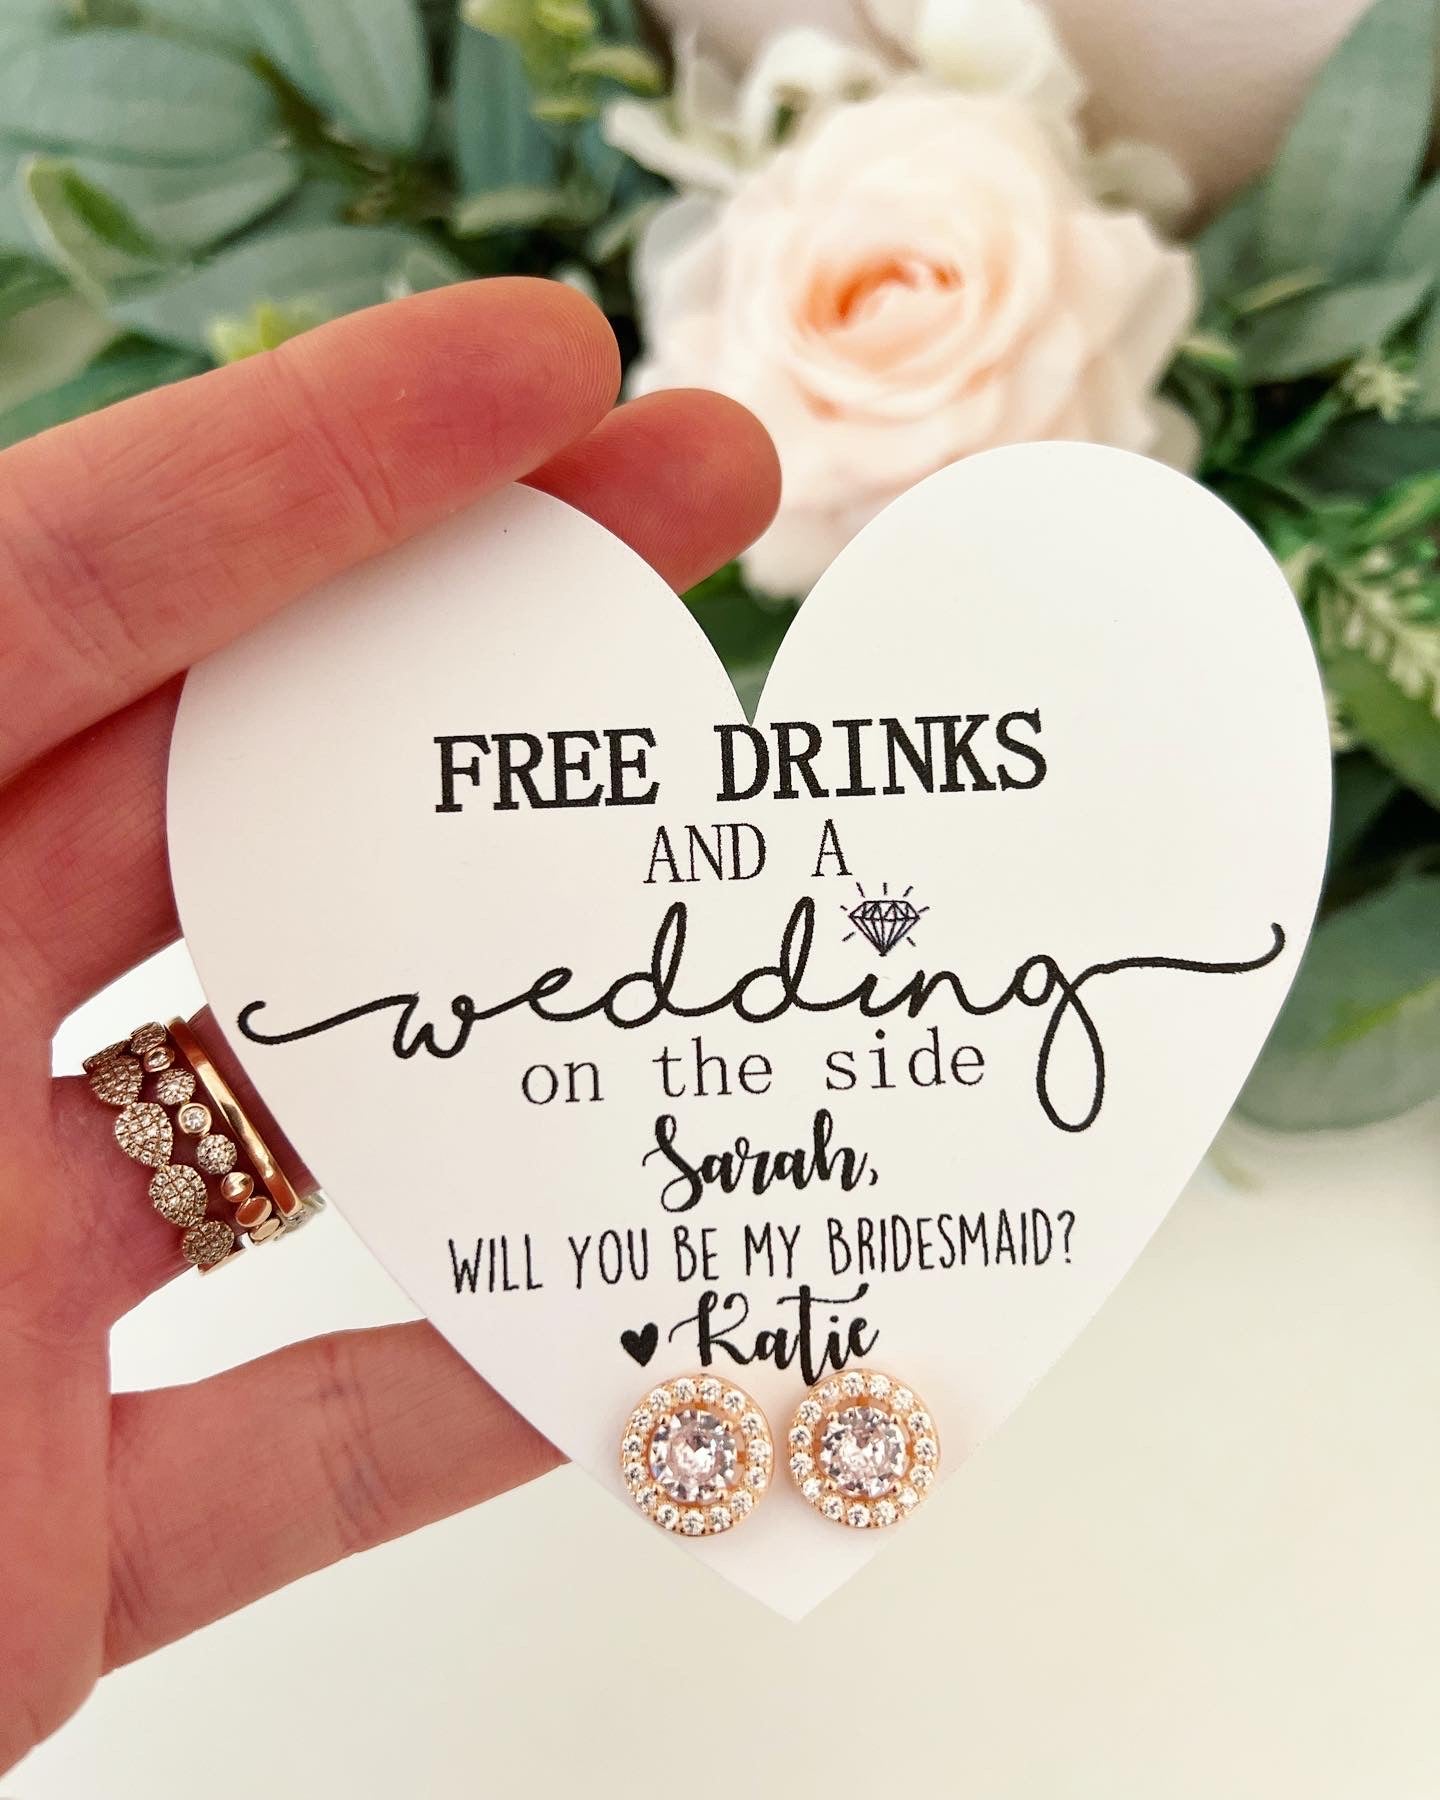 Will you be my bridesmaid? CZ earrings